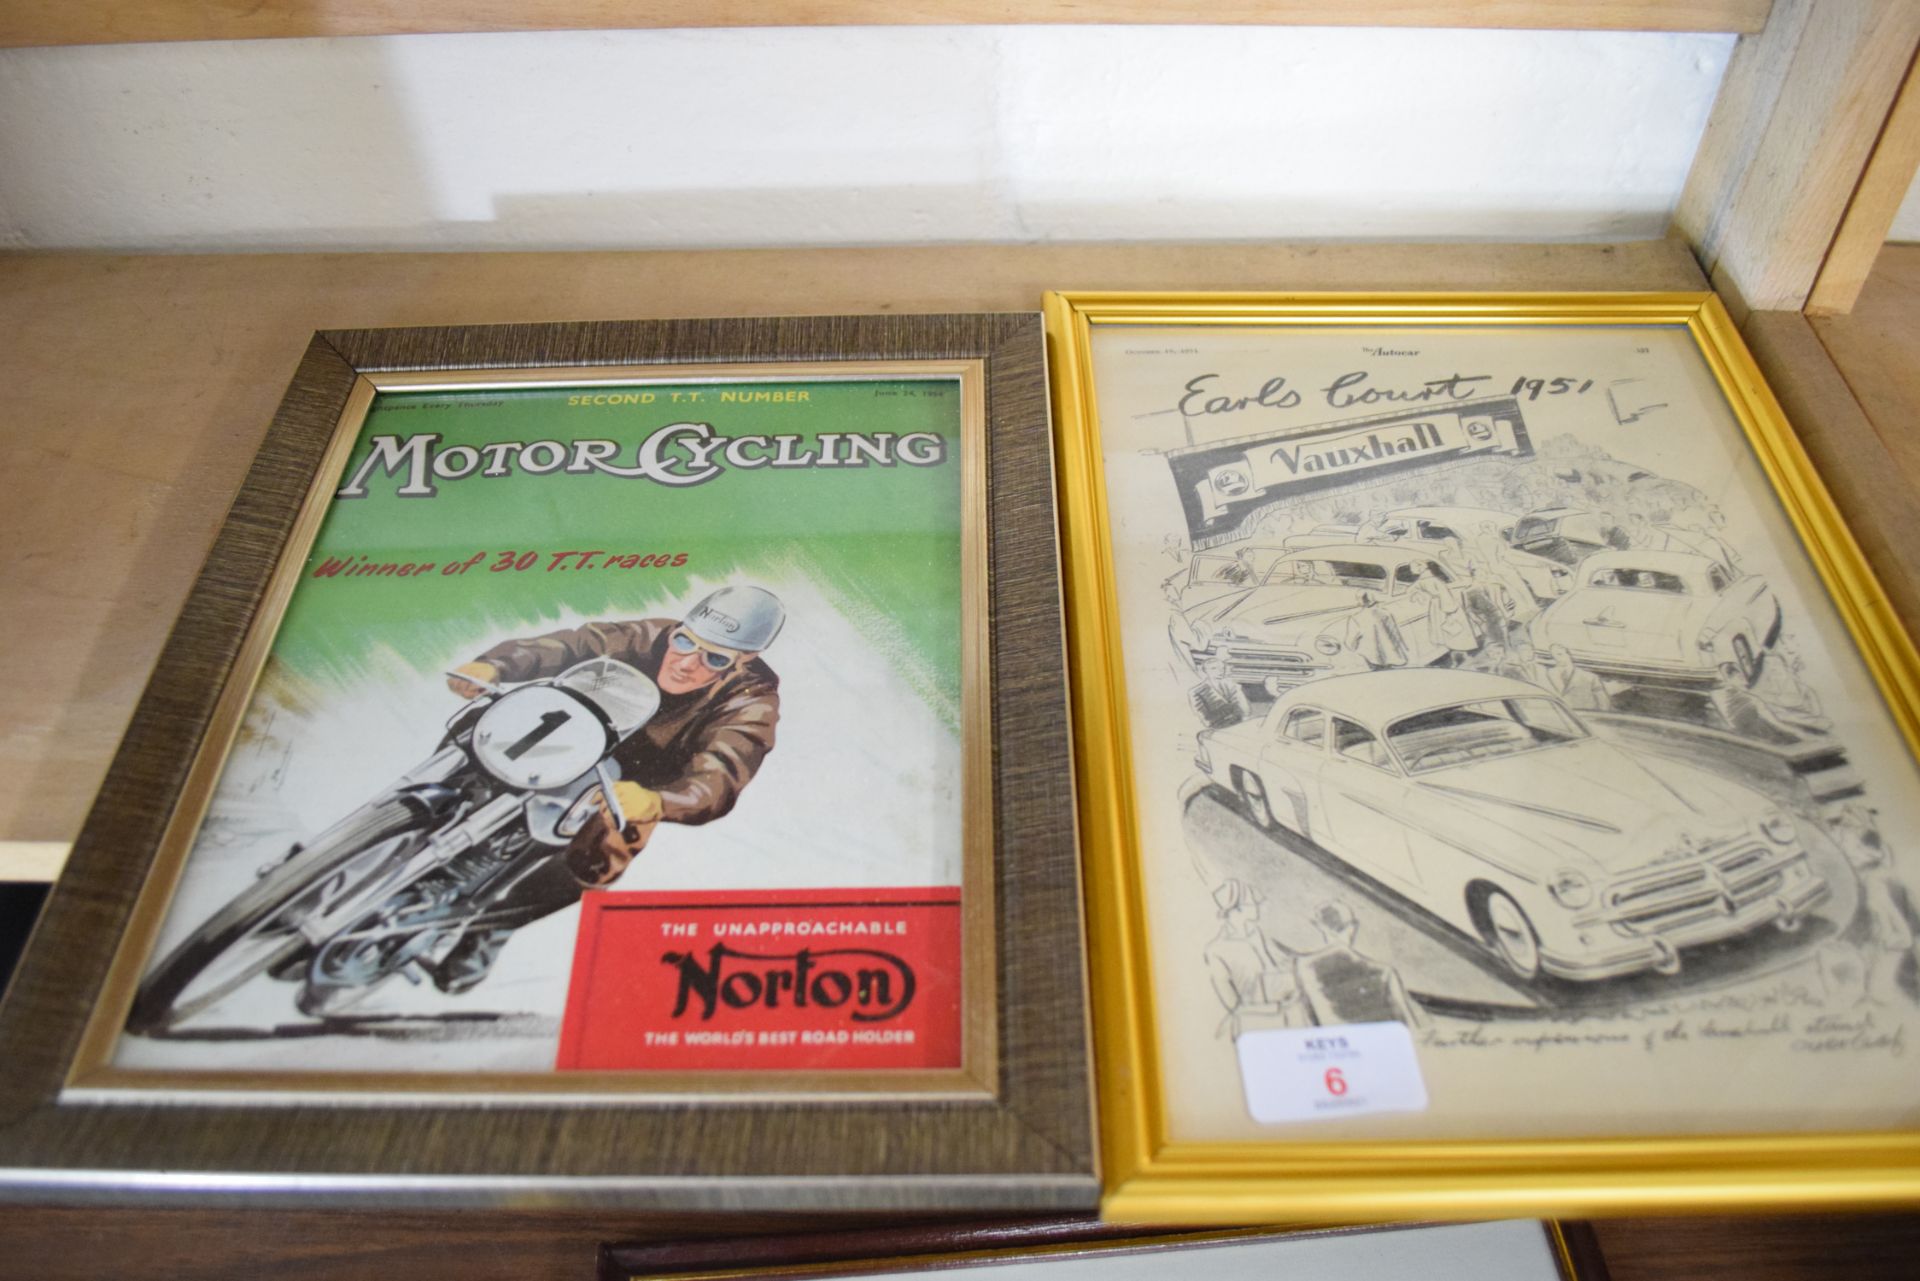 Pair of advertising prints taken from magazines - Norton Motorcycles and Vauxhall cars